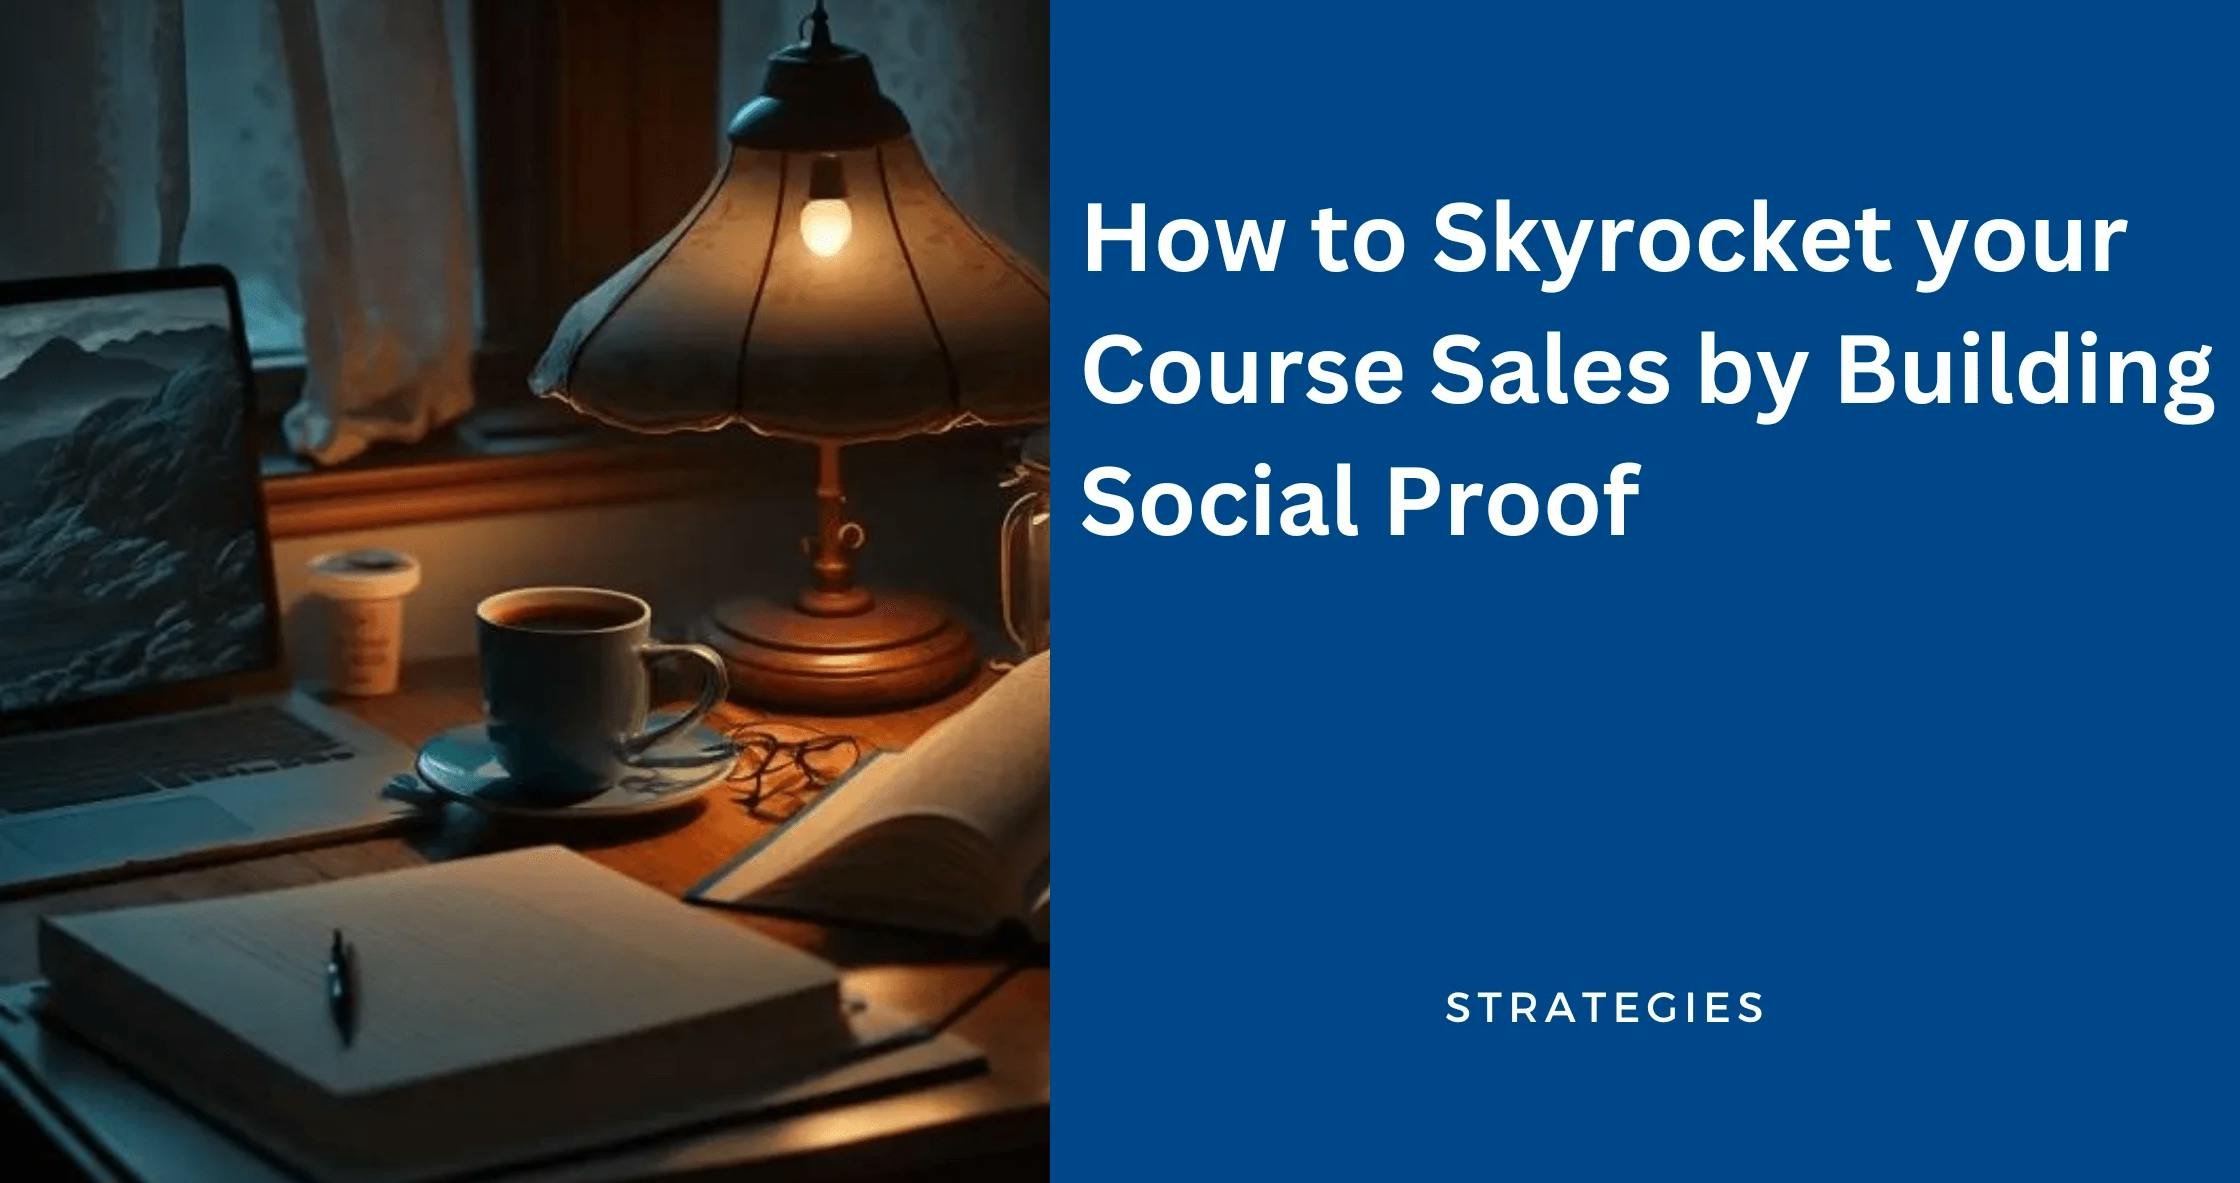 Skyrocket your course sales with social proof